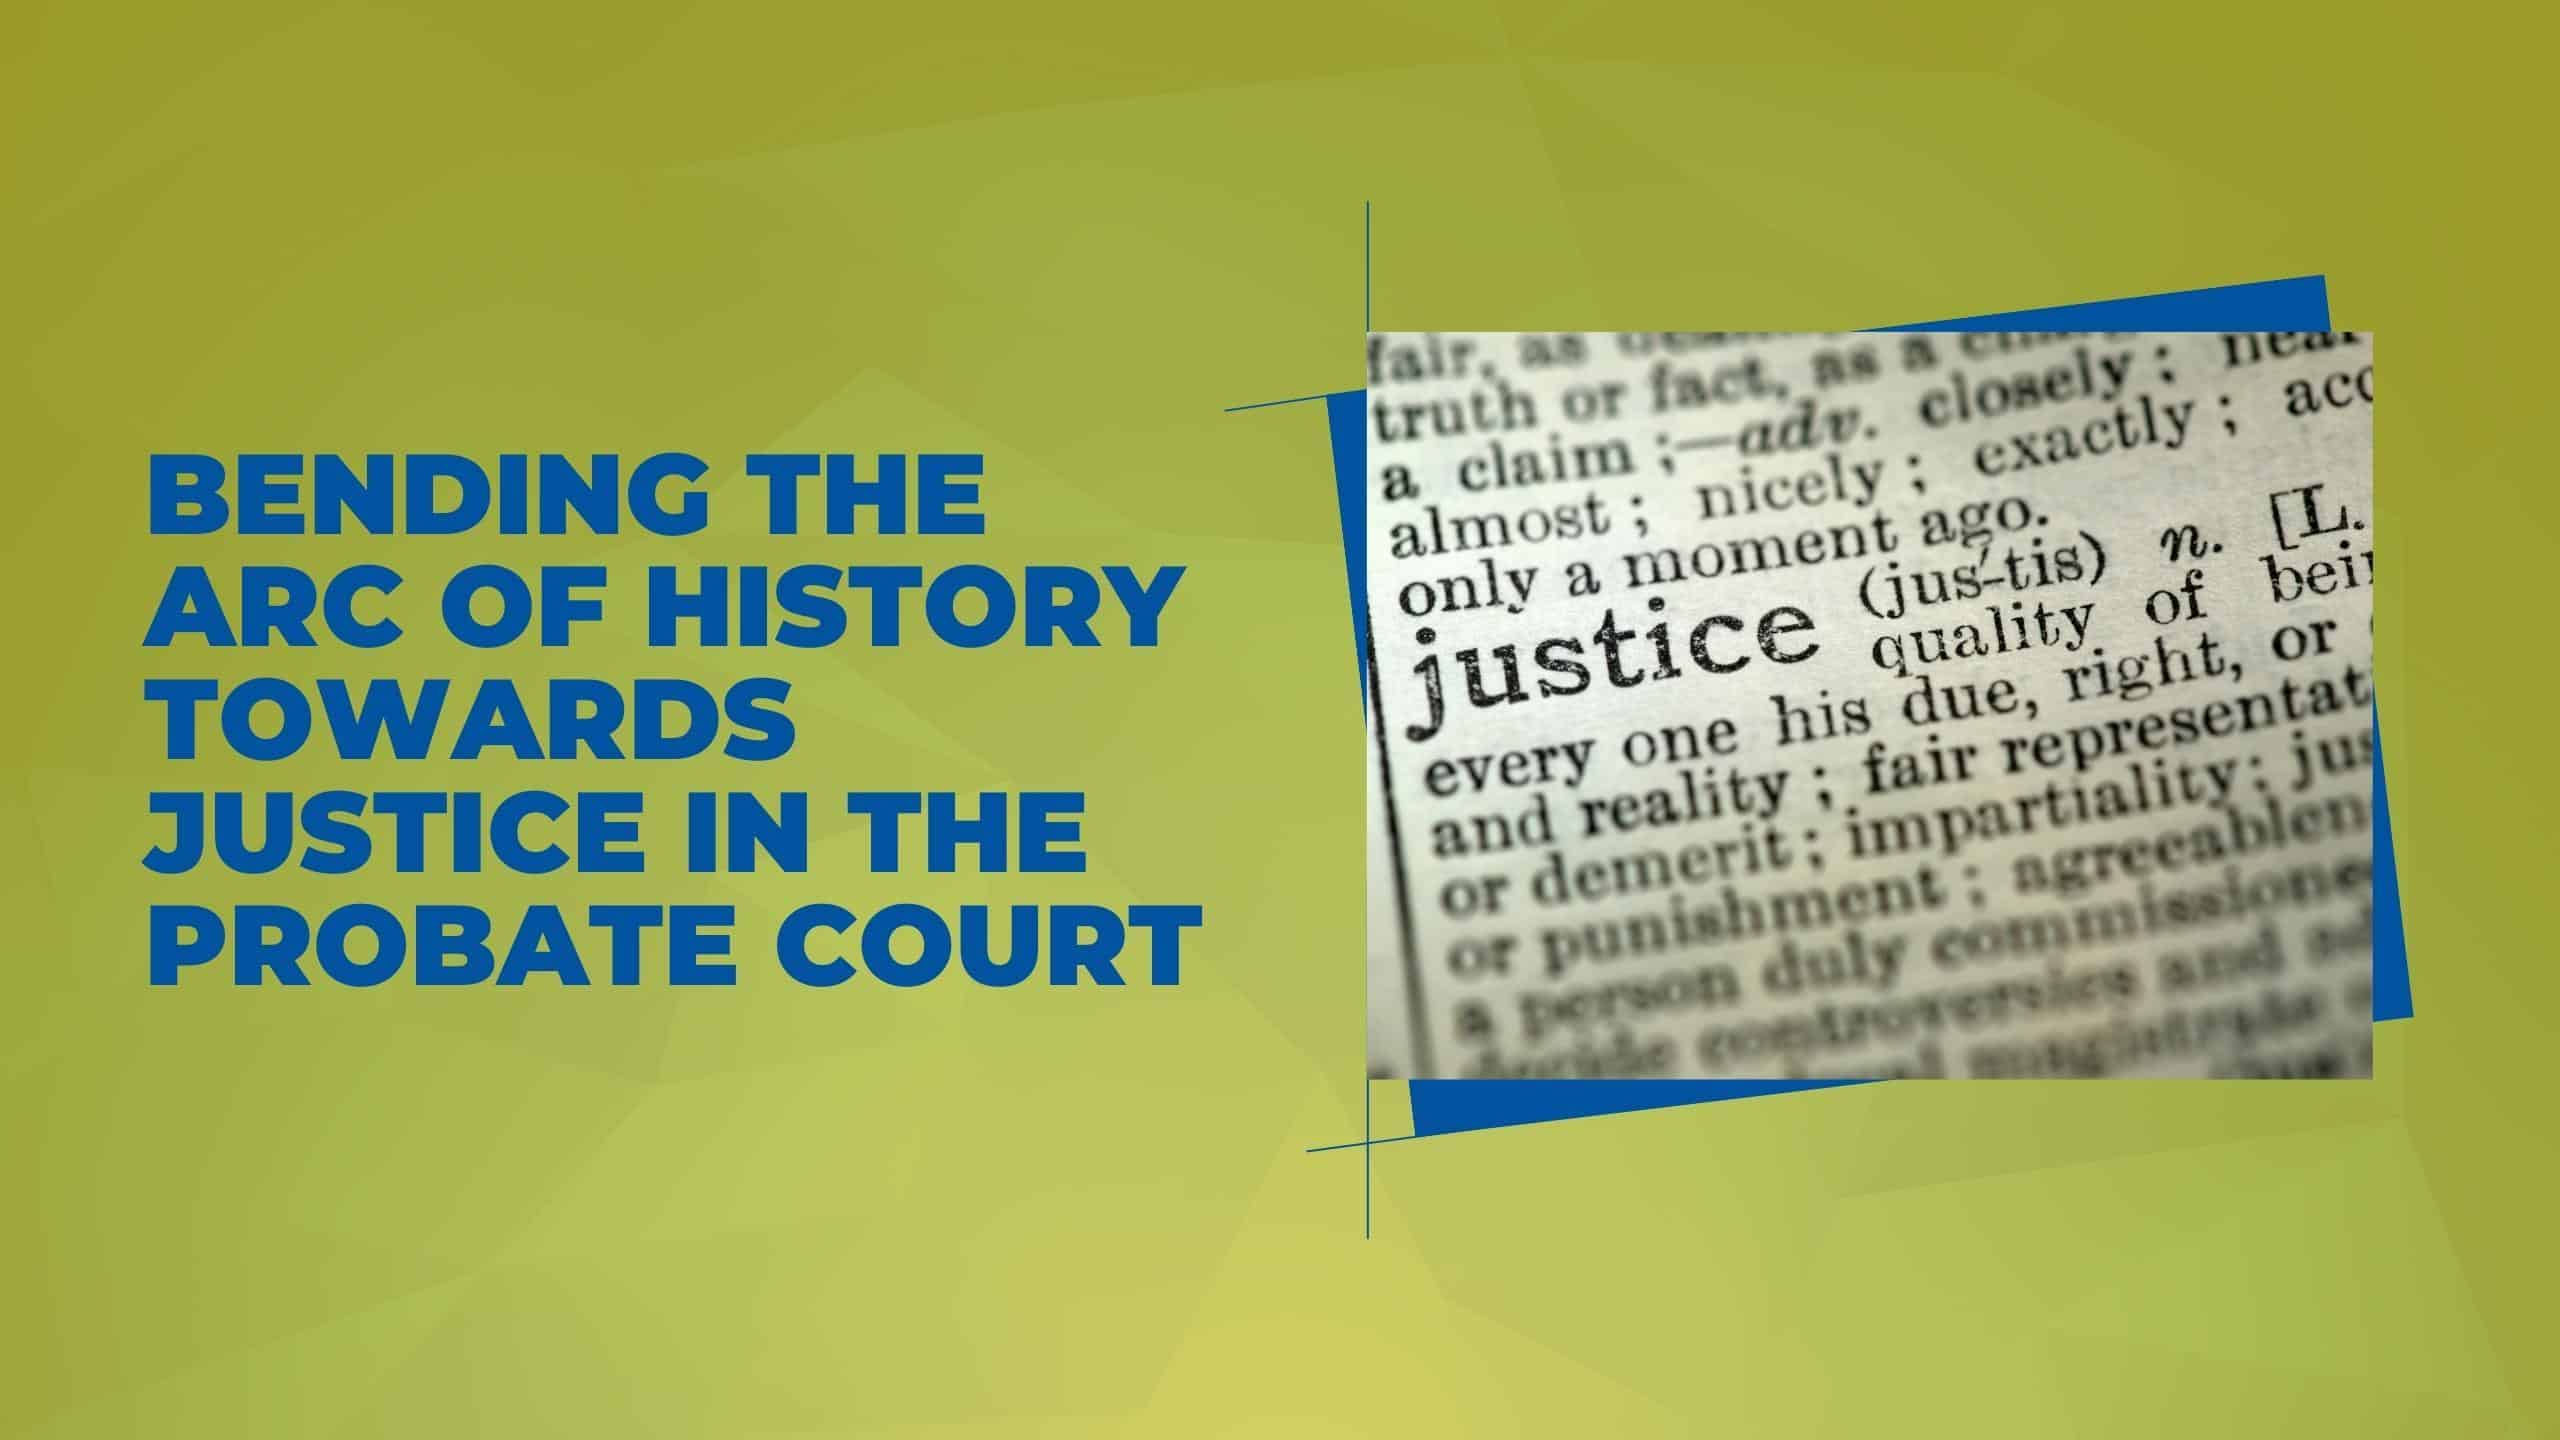 Bending the Arc of History Towards Justice in the Probate Court